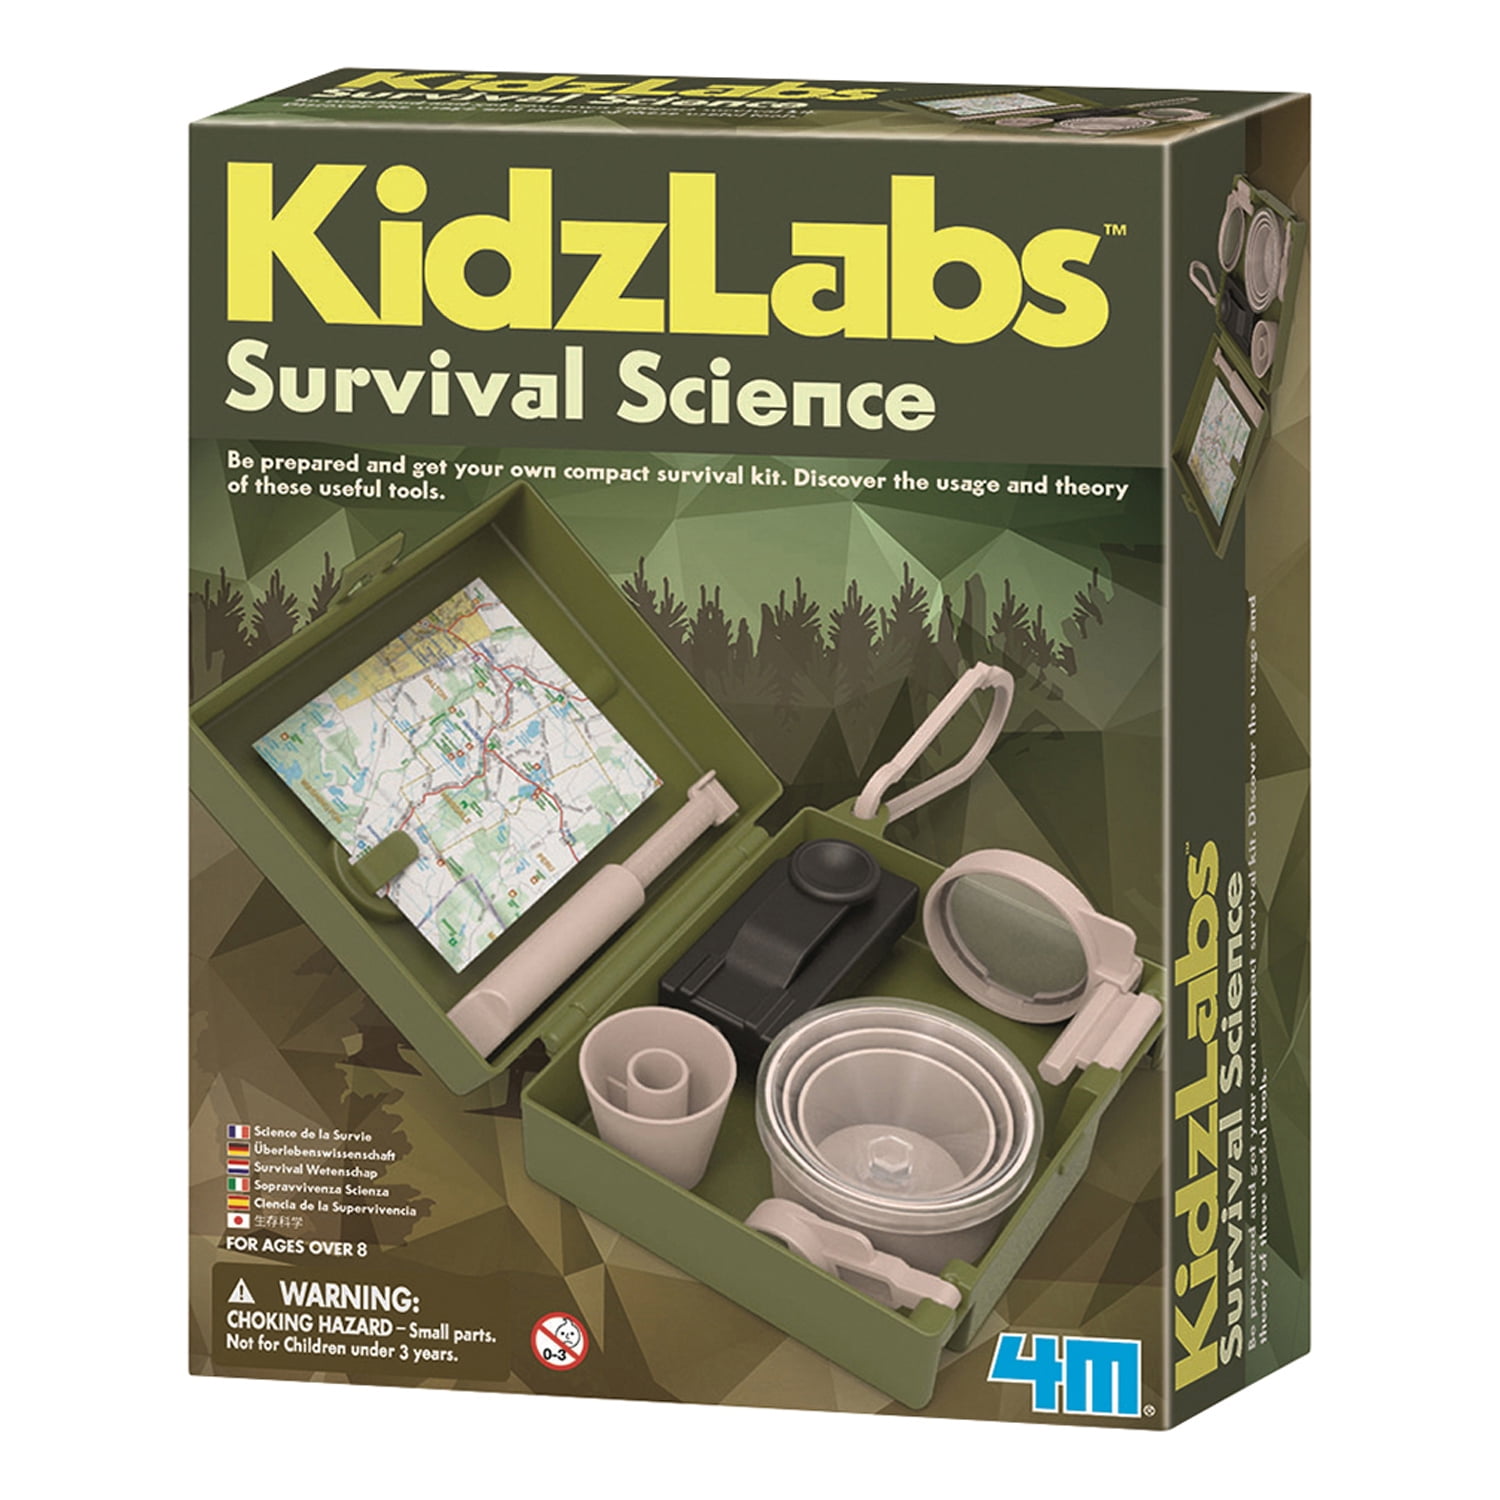 Details about   Kitchen Science  Kidz Labs Fun Science Product 4M Contains 6 Experiments New 